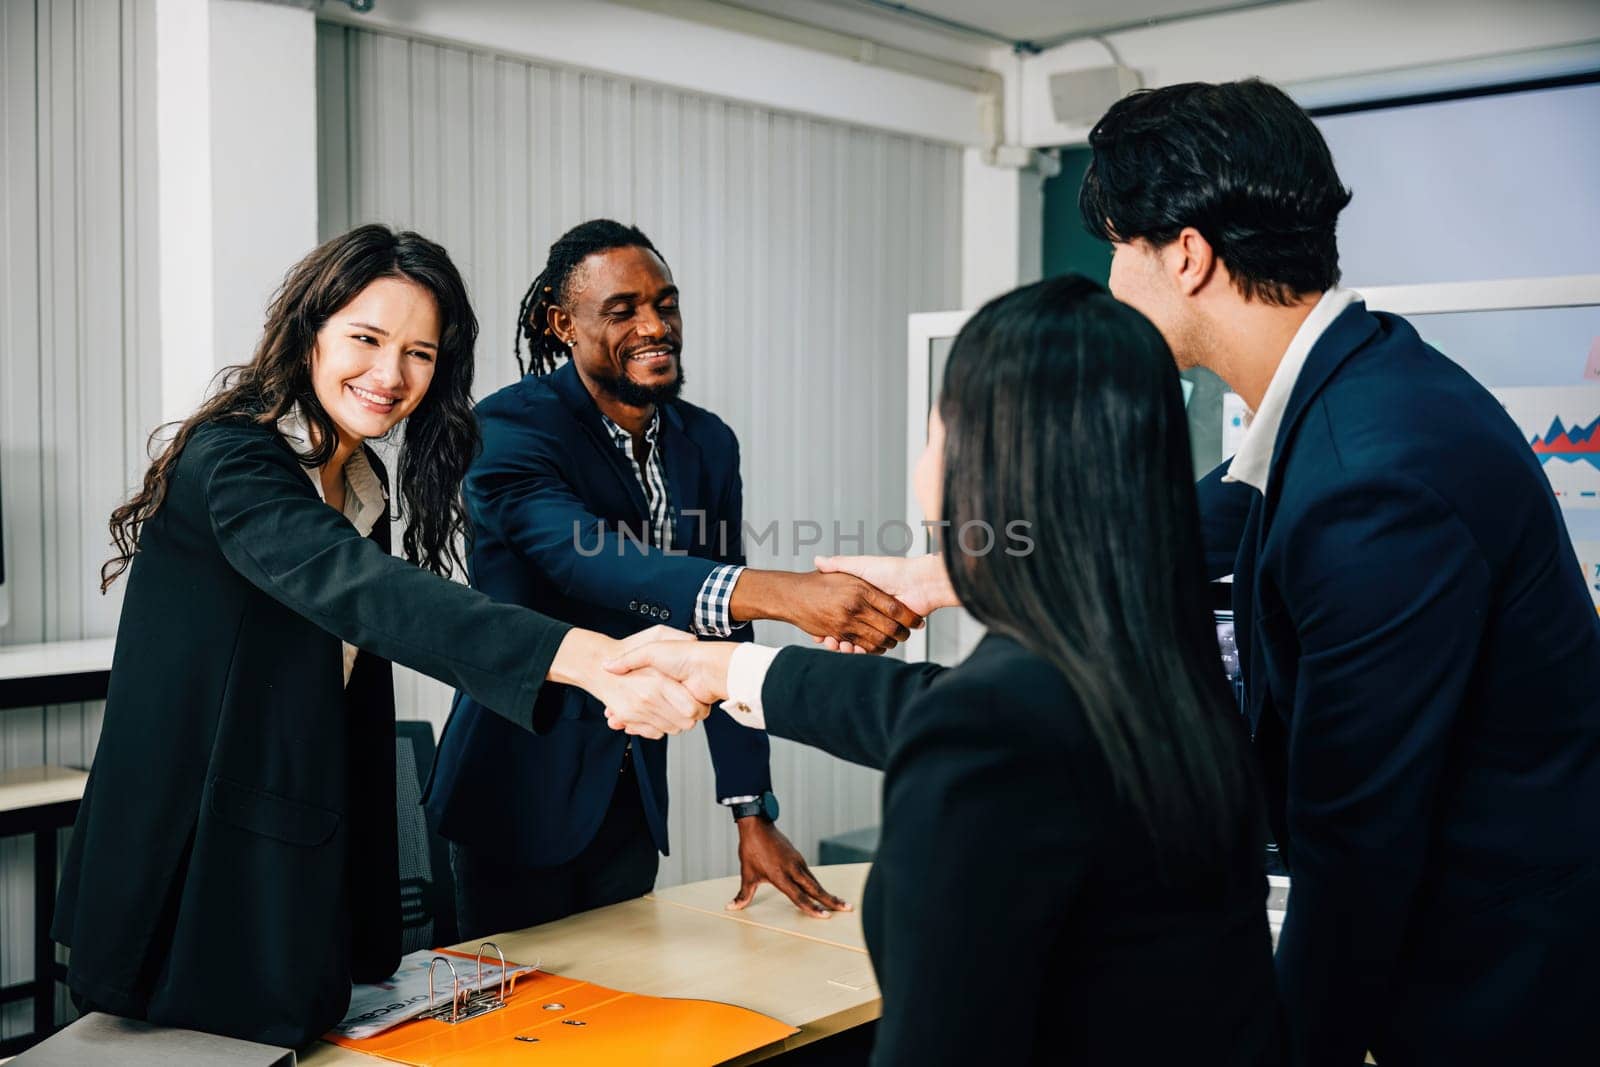 In an office, business people shake hands to celebrate an agreement. Colleagues, including marketing experts, successfully conclude a deal after a productive meeting. Teamwork by Sorapop